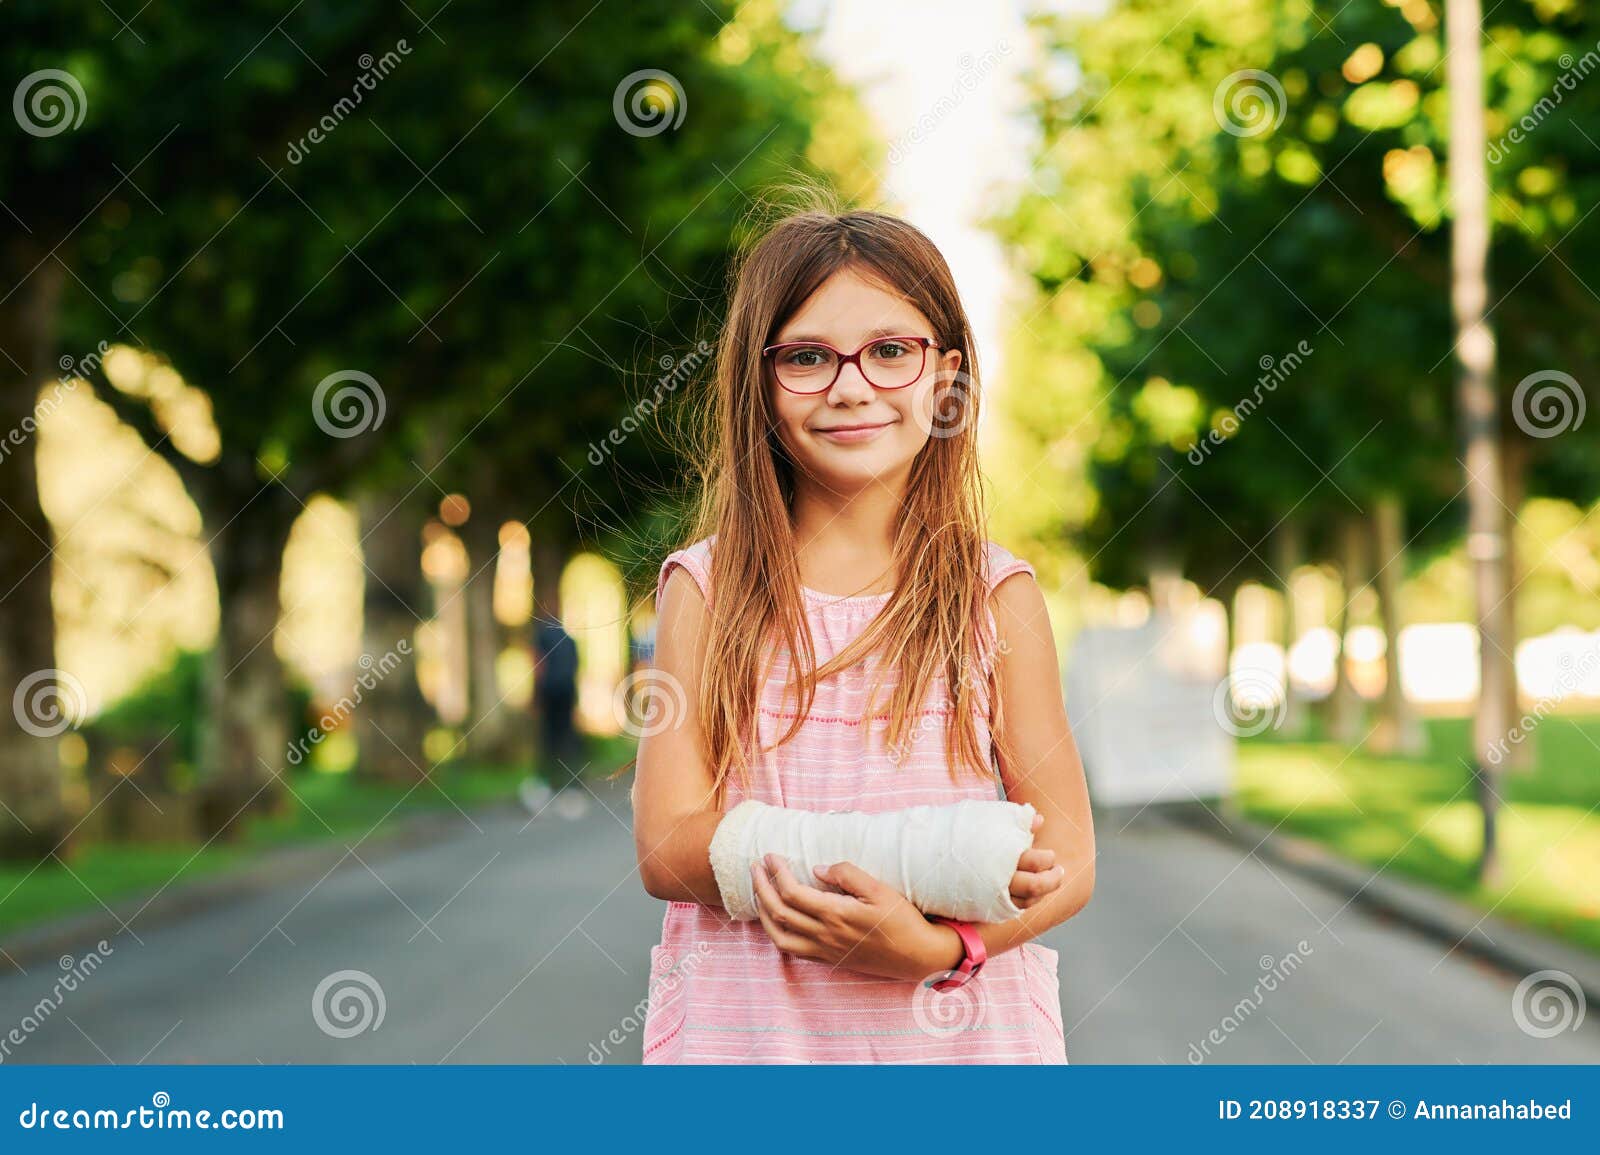 portrait of sweet little girl with a cast